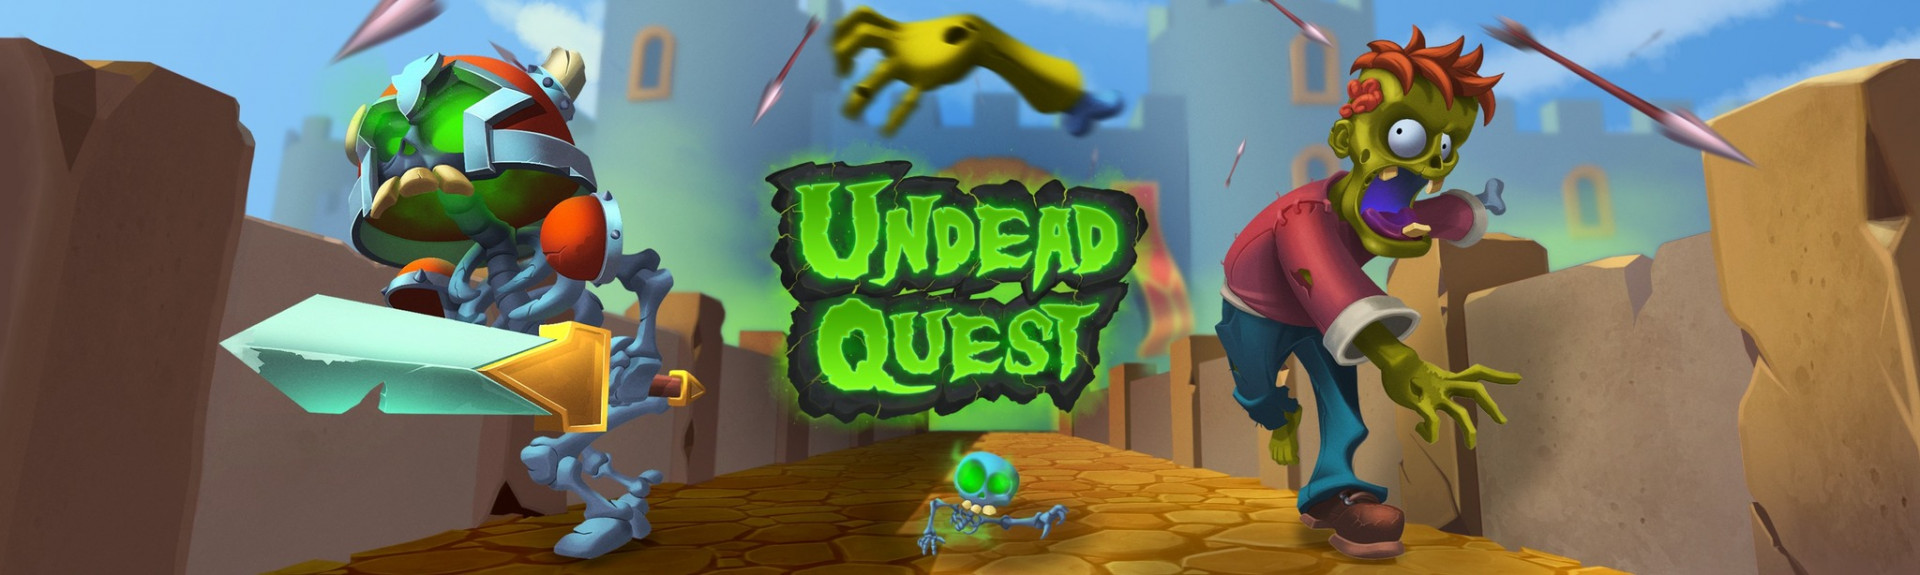 Undead Quest Demo